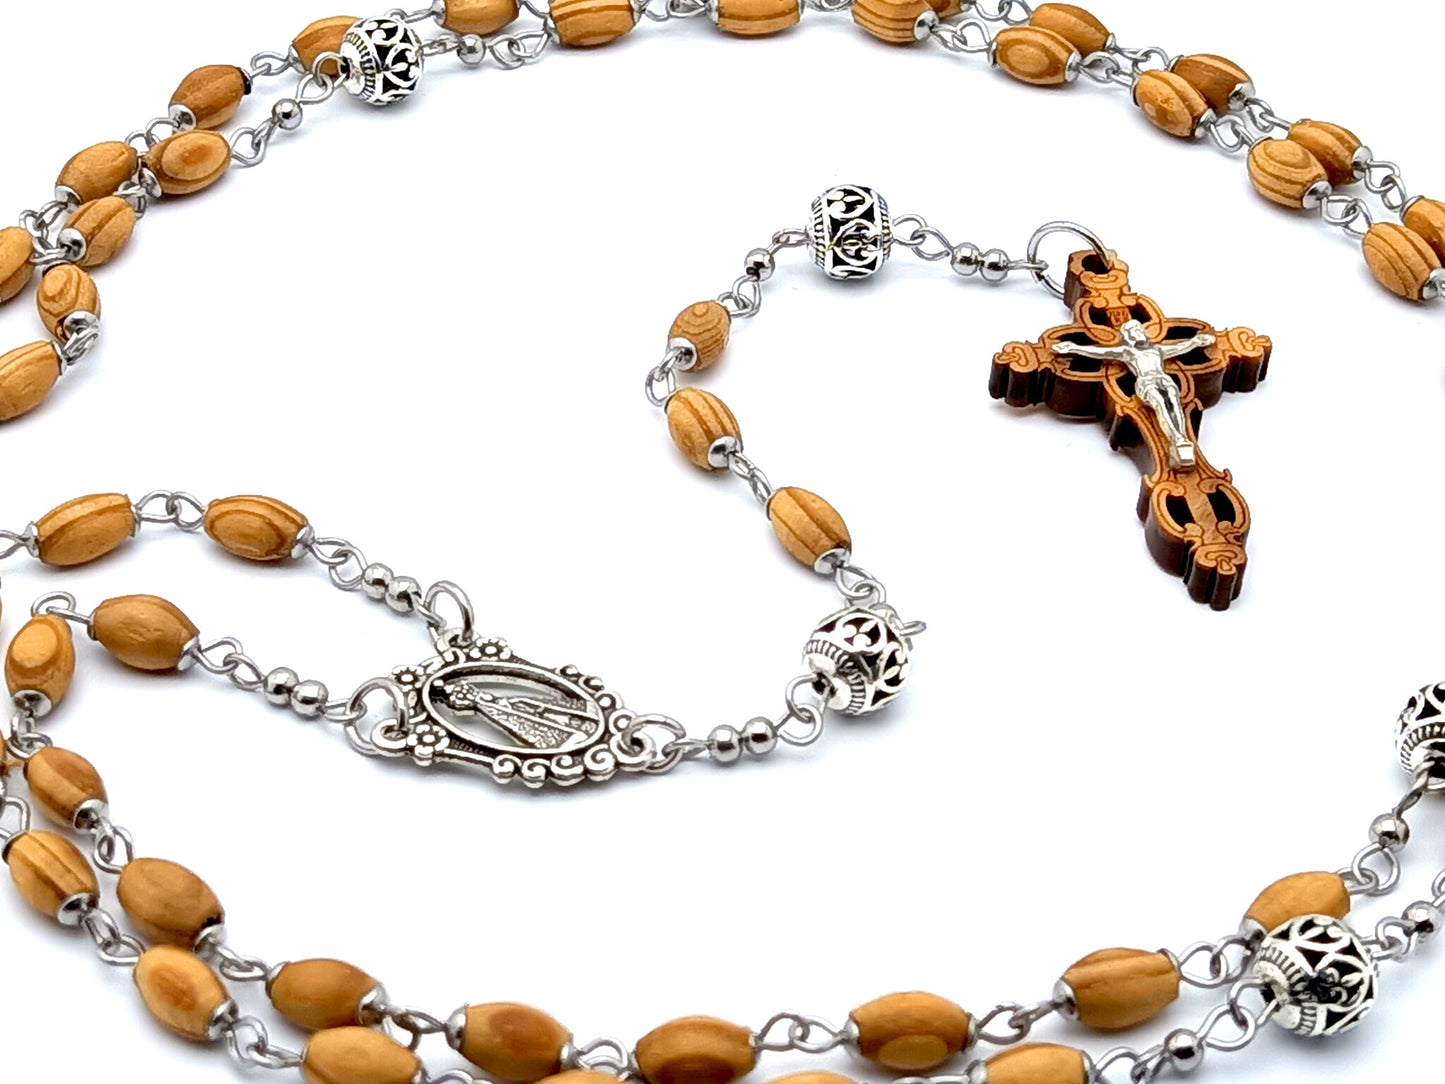 Our Lady of Charity unique rosary beads with wooden and Tibetan silver beads and Jerusalem olive wood laser cut crucifix.